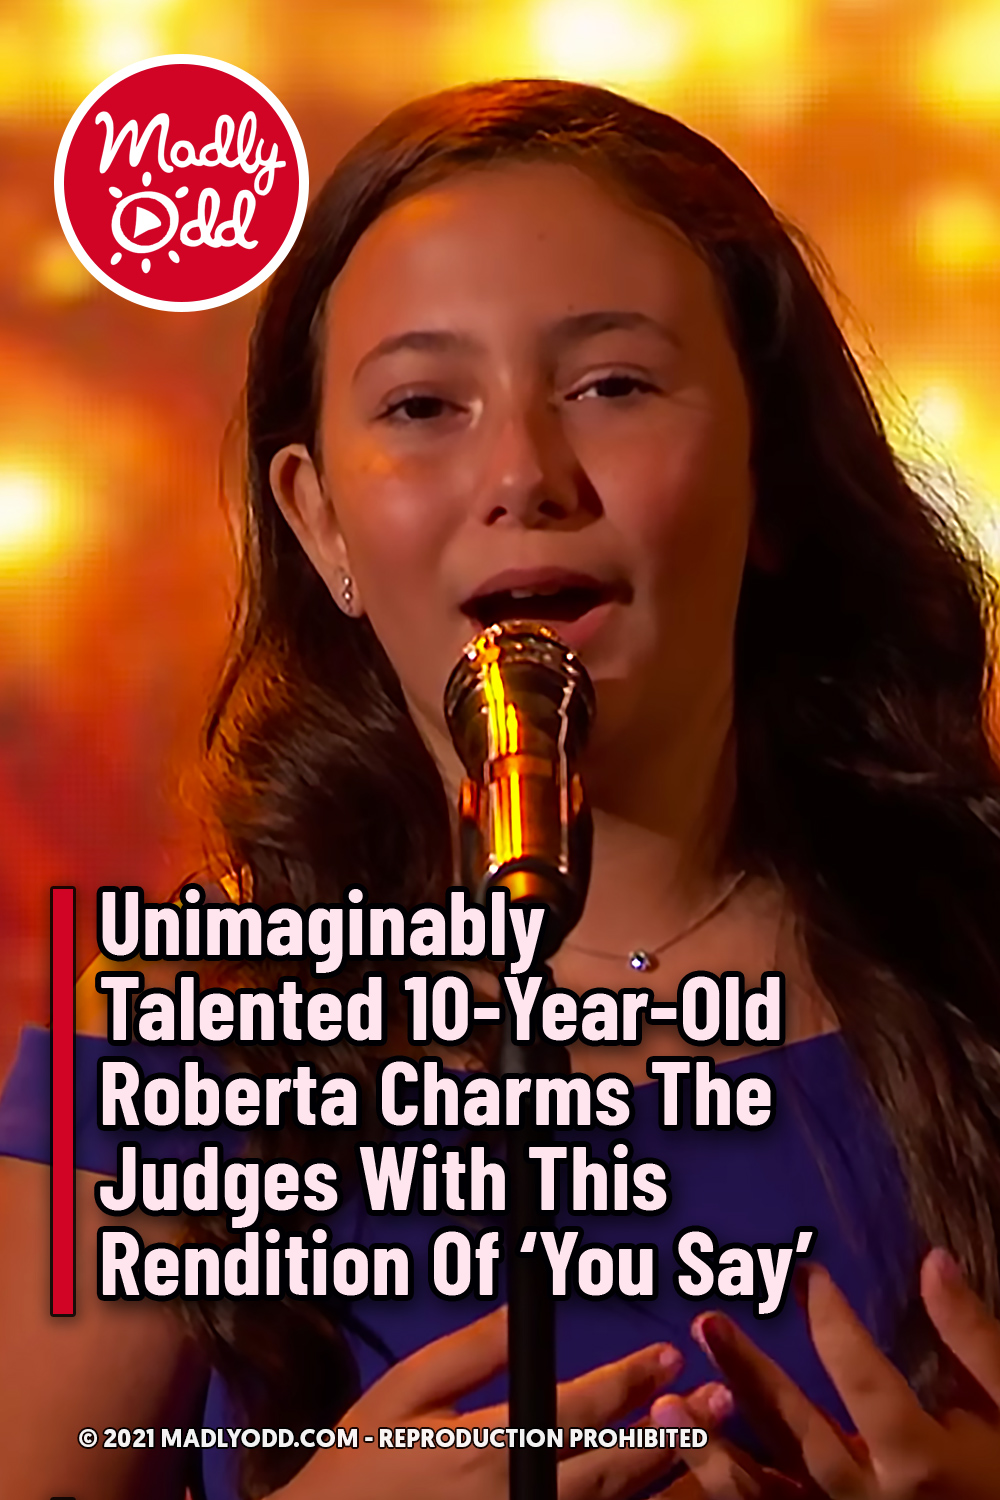 Unimaginably Talented 10-Year-Old Roberta Charms The Judges With This Rendition Of ‘You Say’